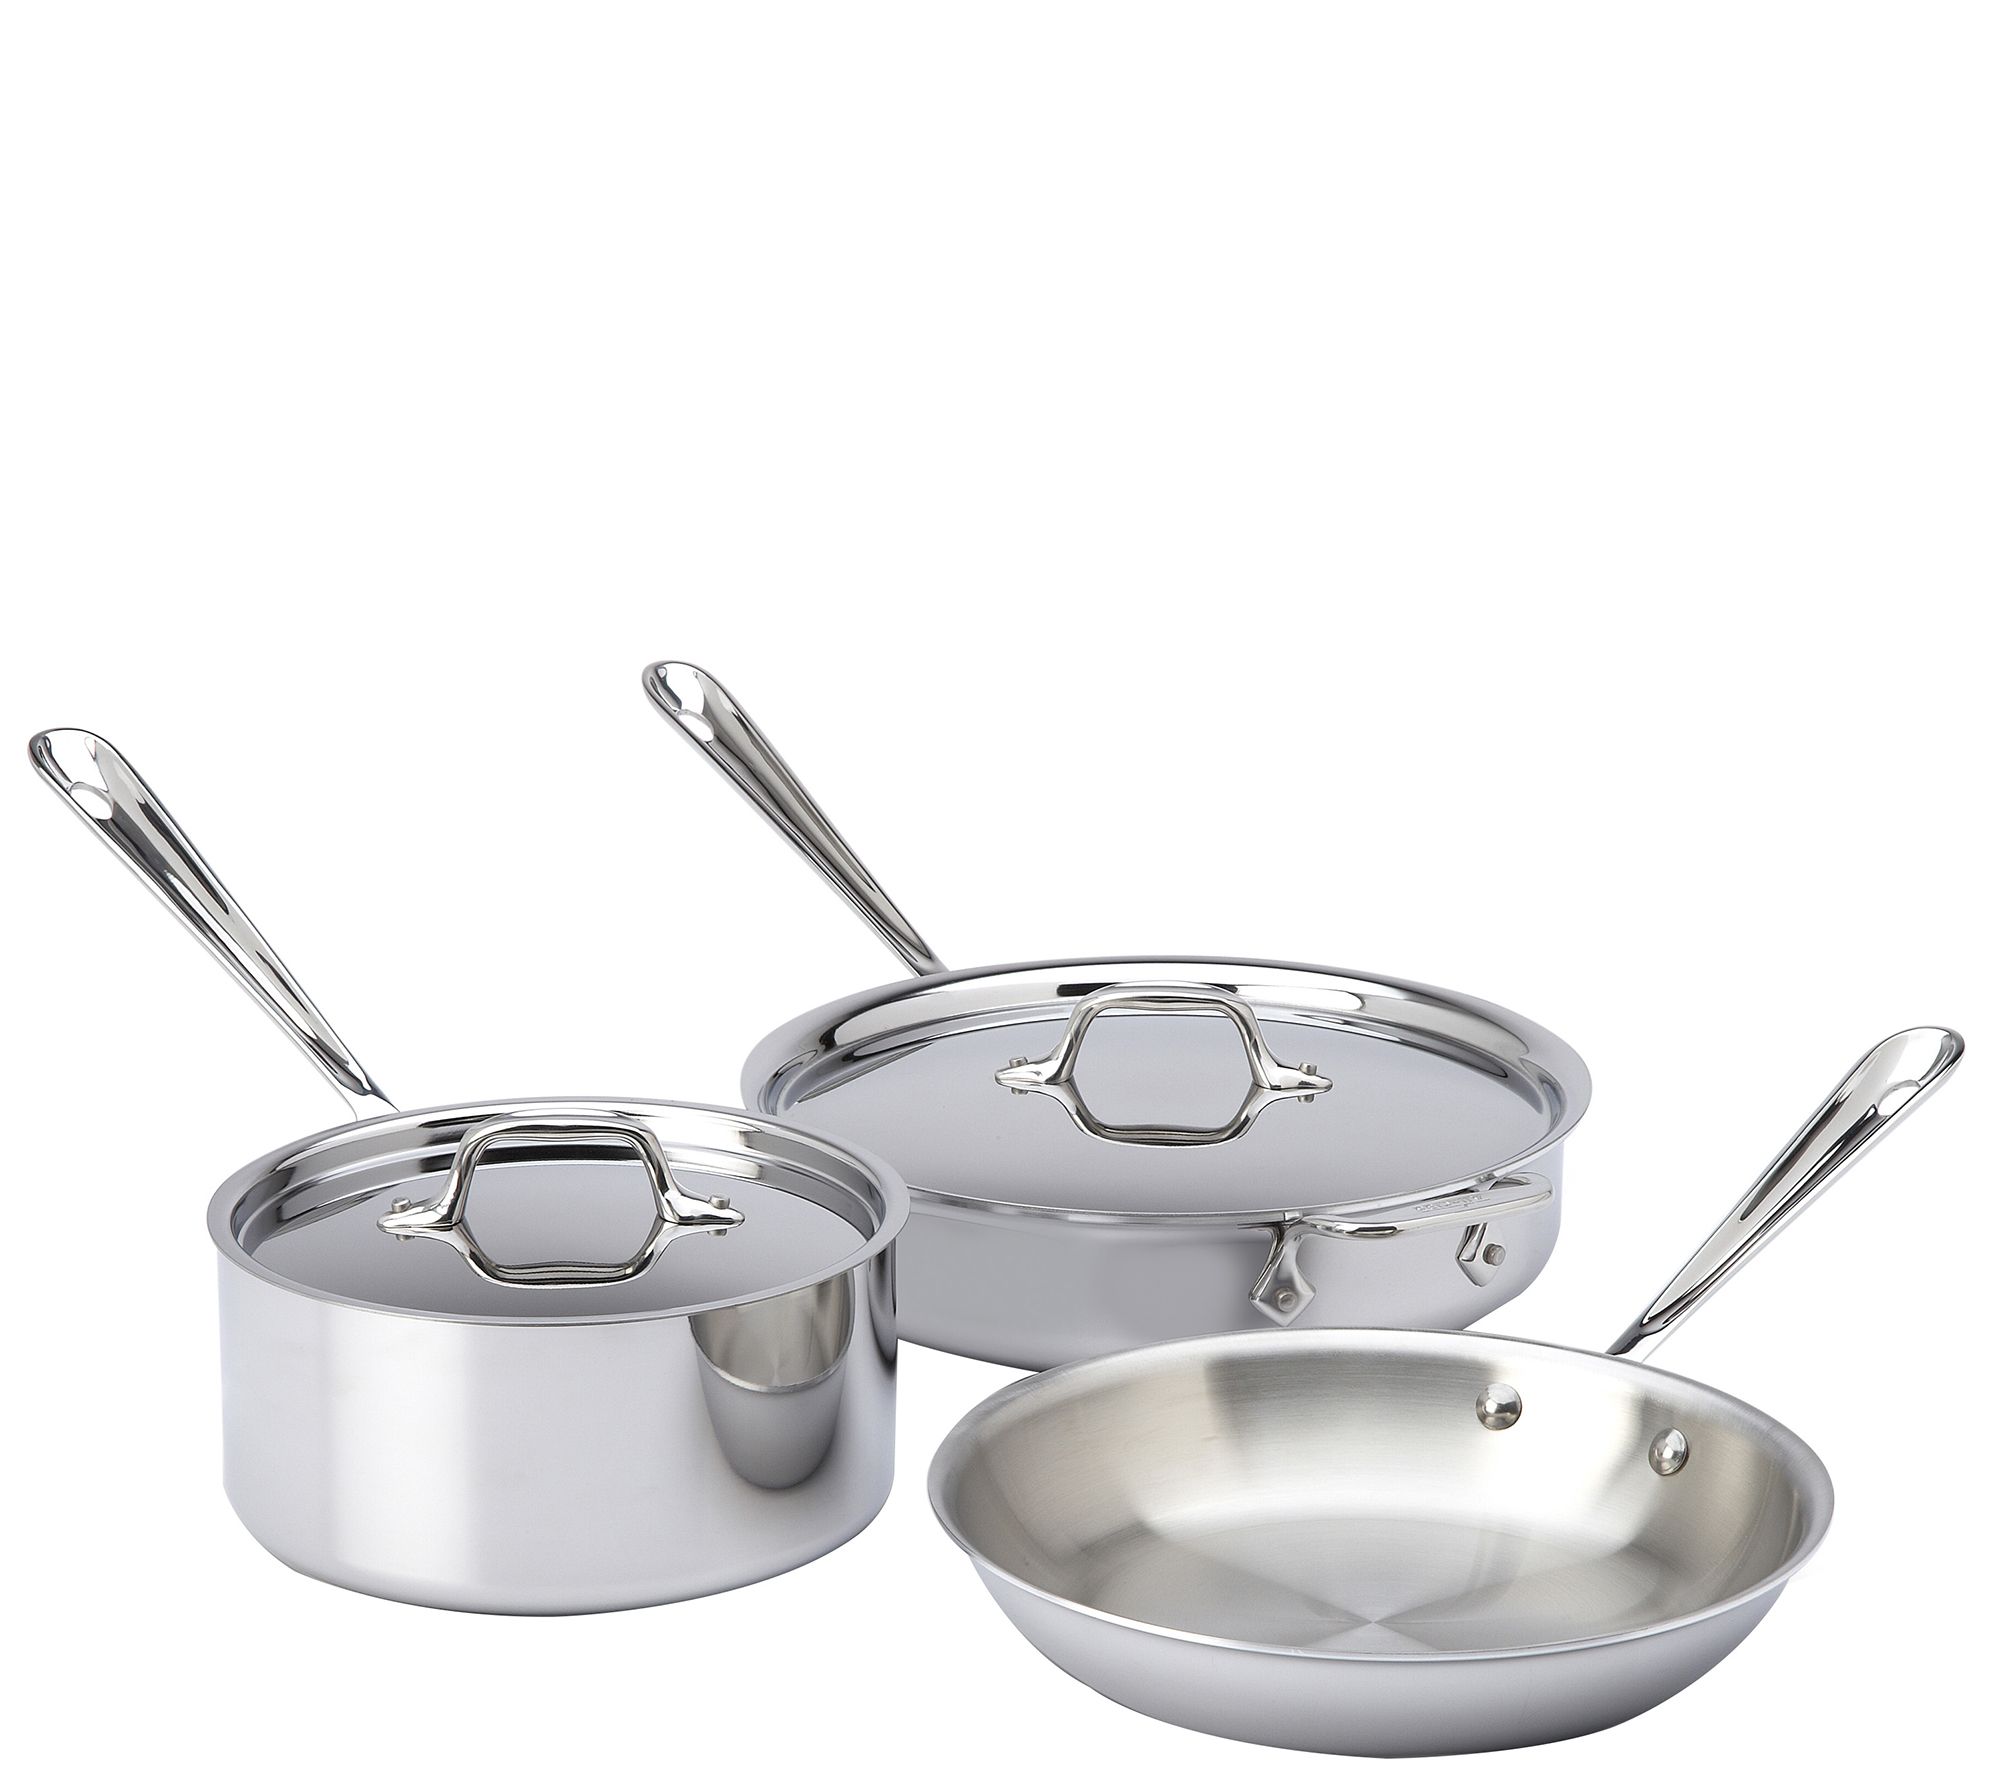 All-Clad Stainless Steel 5-Piece Cookware Set - QVC.com